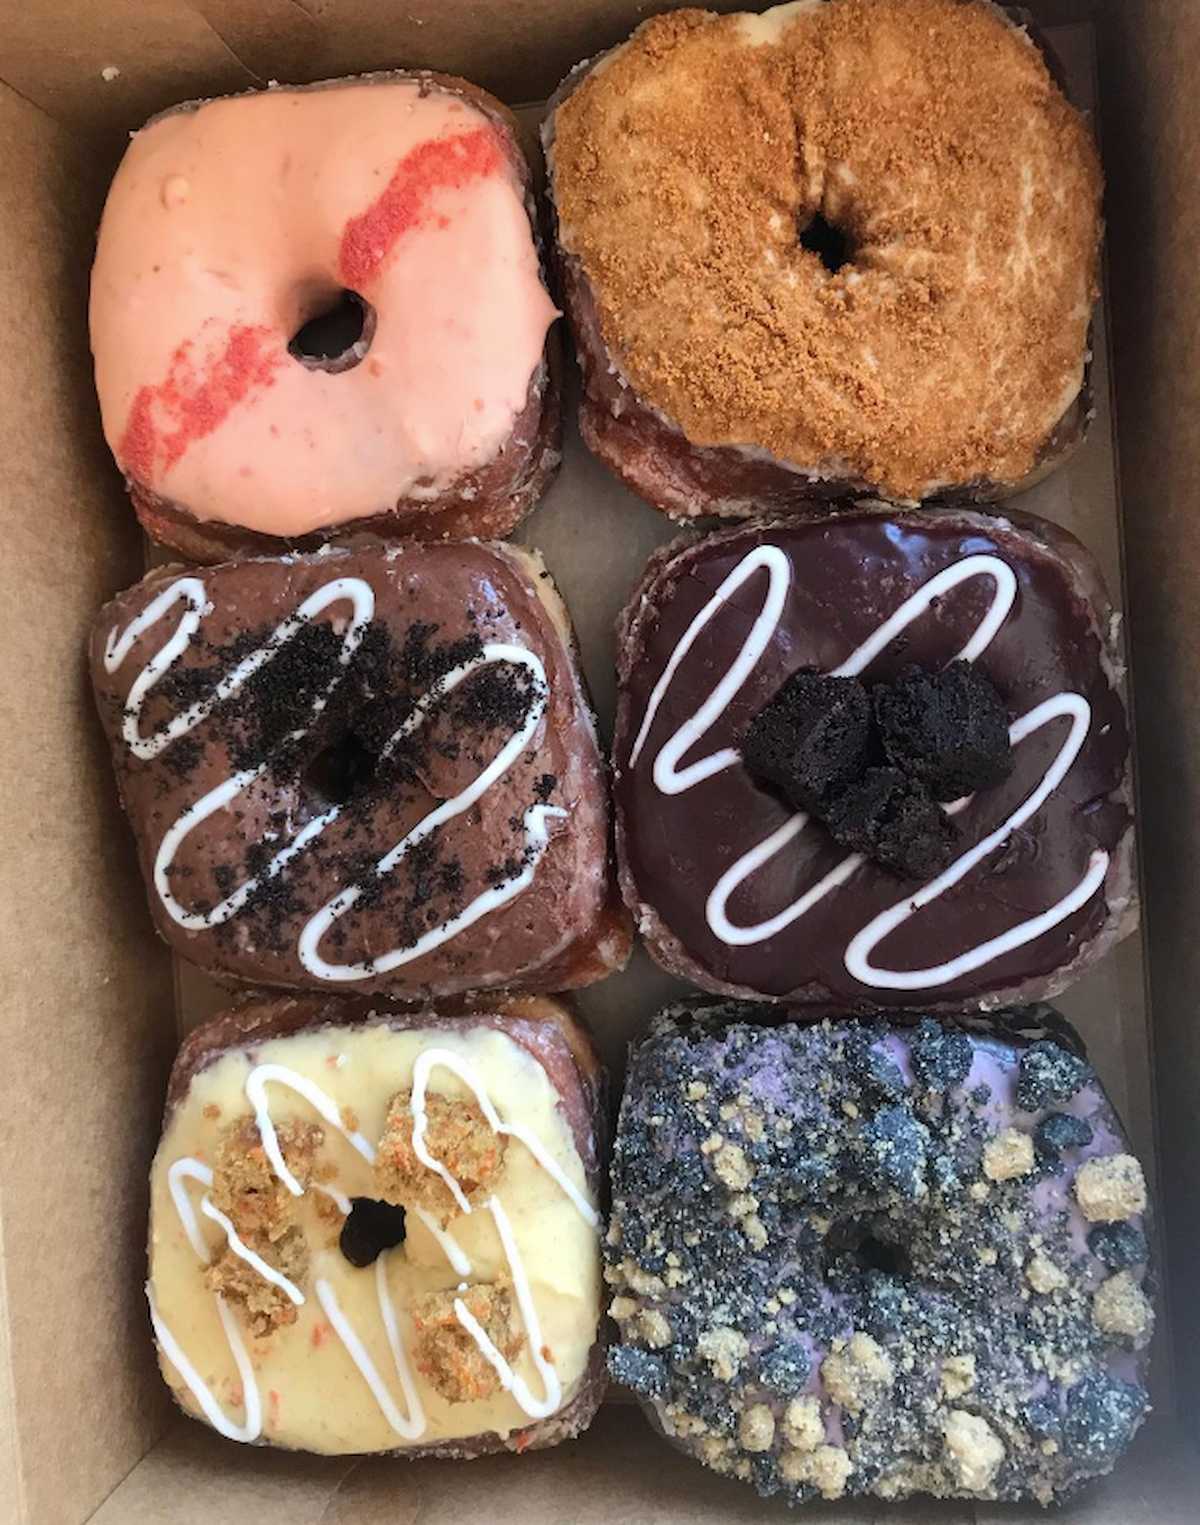 An assortment of vegan donuts in a box from Valkyrie Doughnuts.